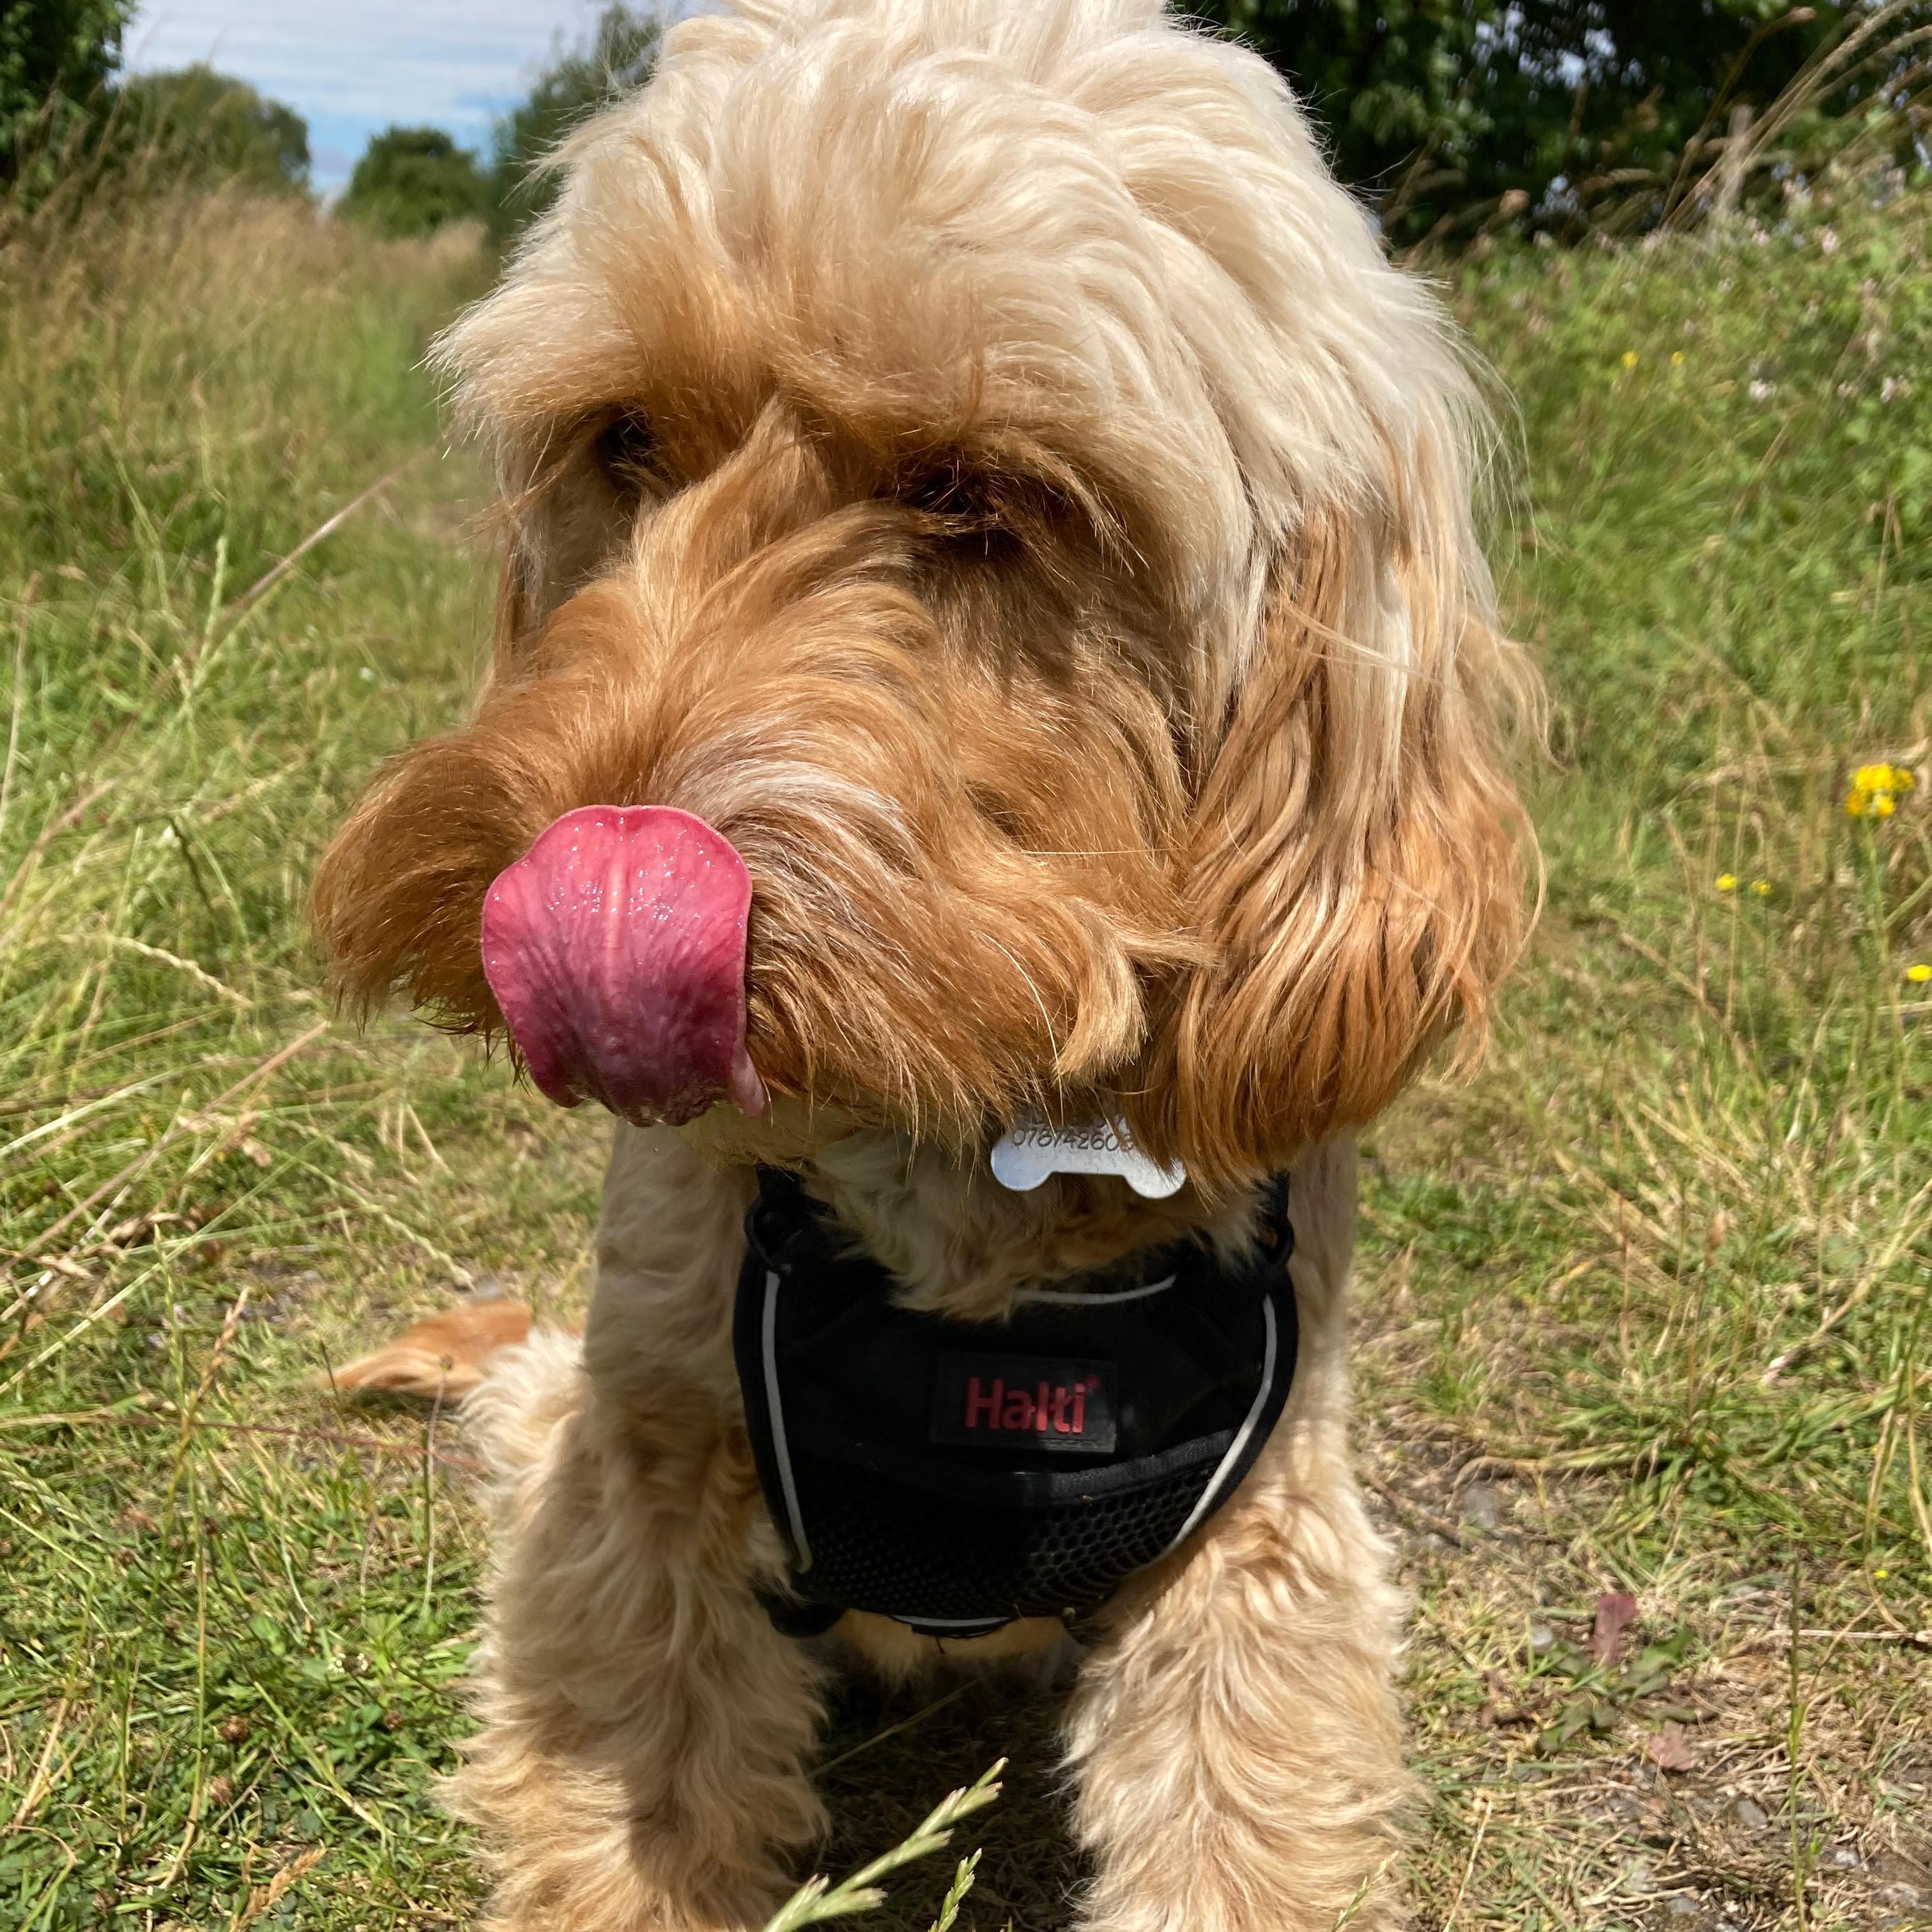 Albie, the Cockapoo, wearing a black dog harness